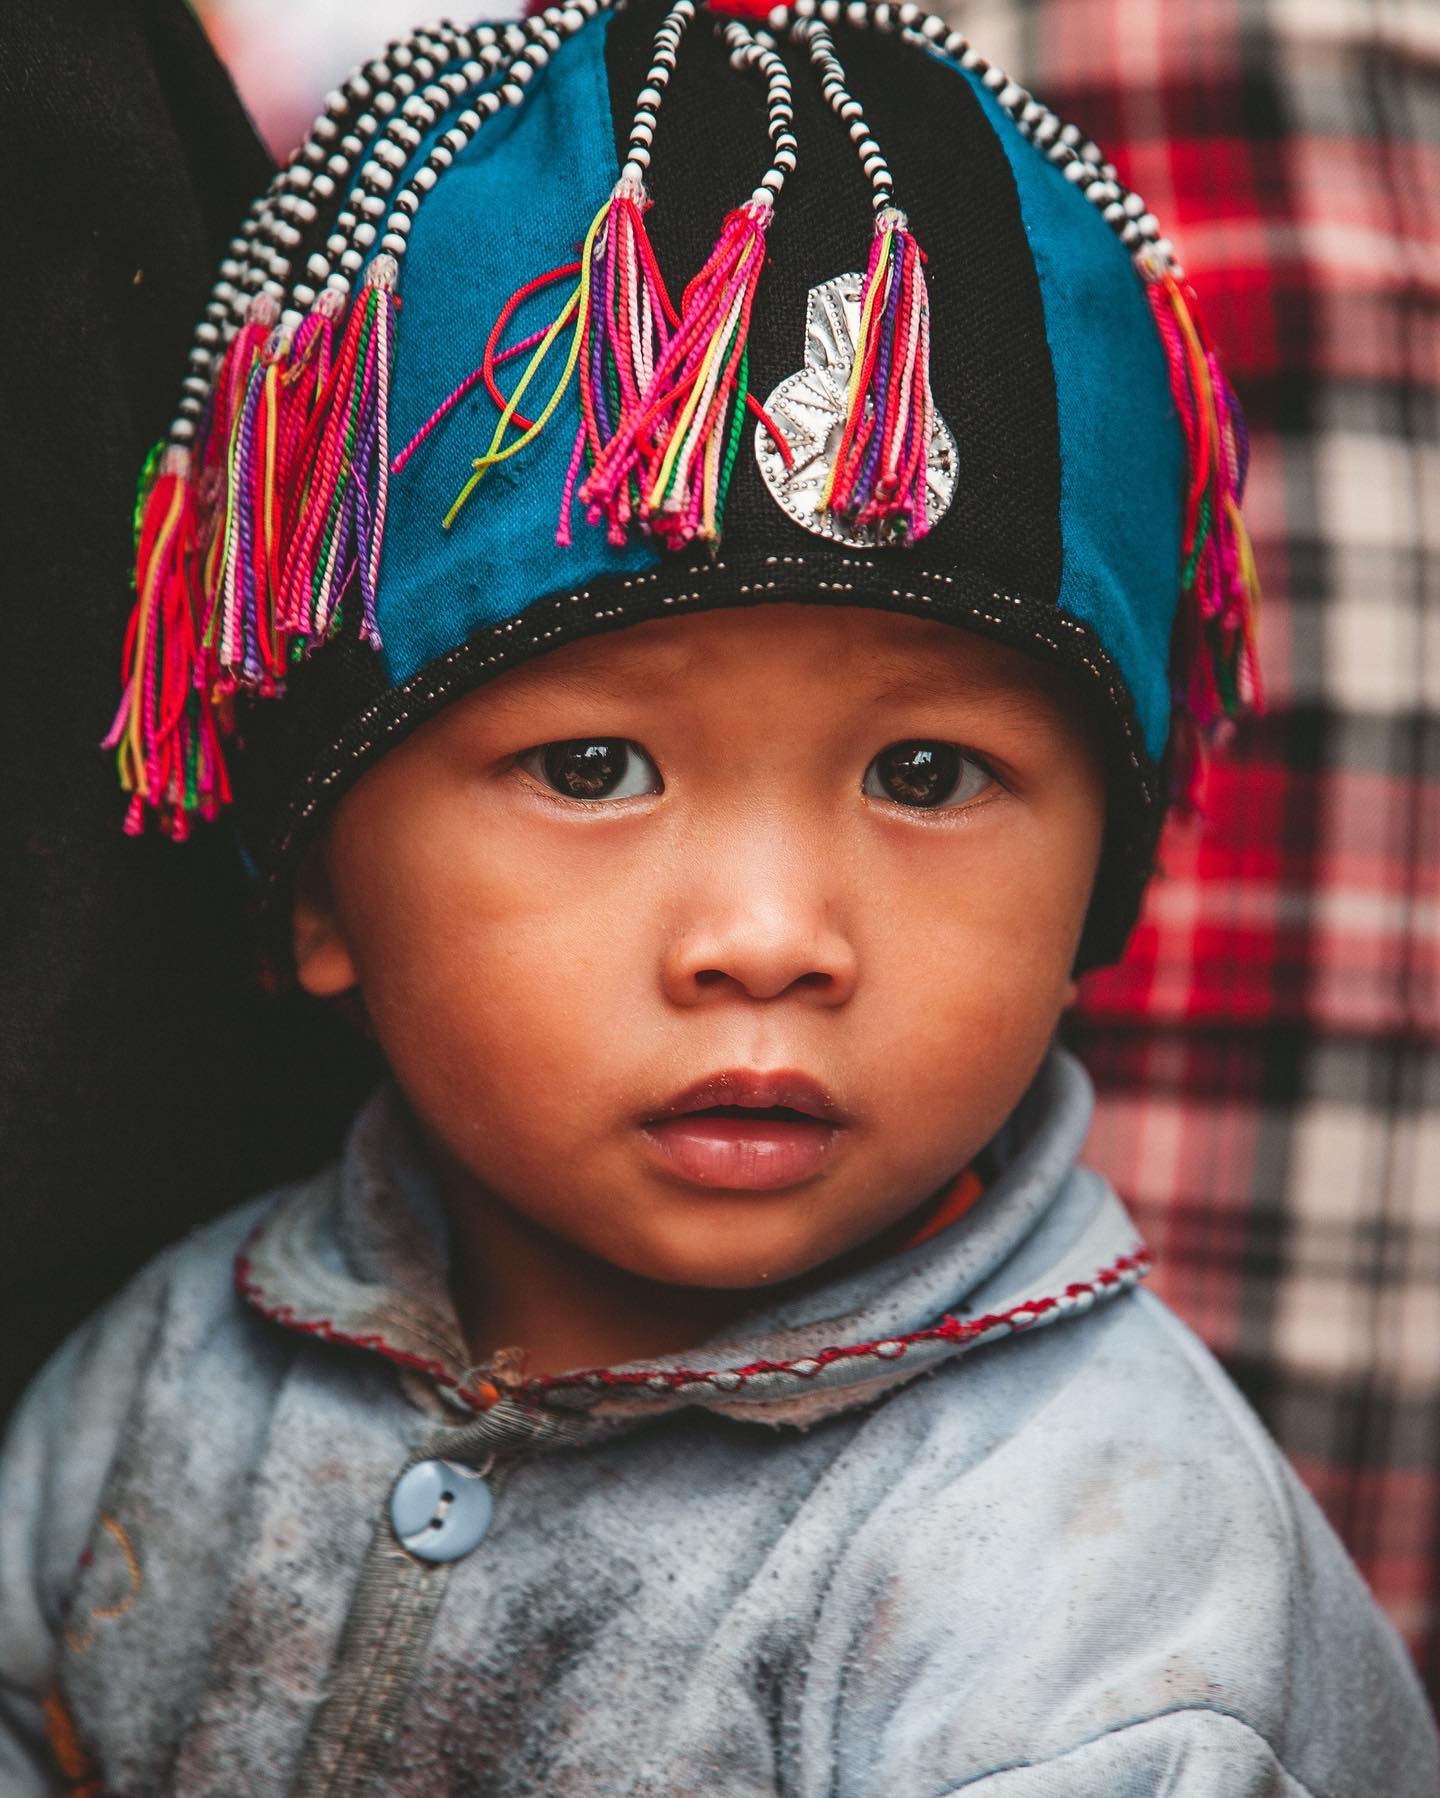 Hmong child at the Meo Vac market in Ha Giang, Vietnam.